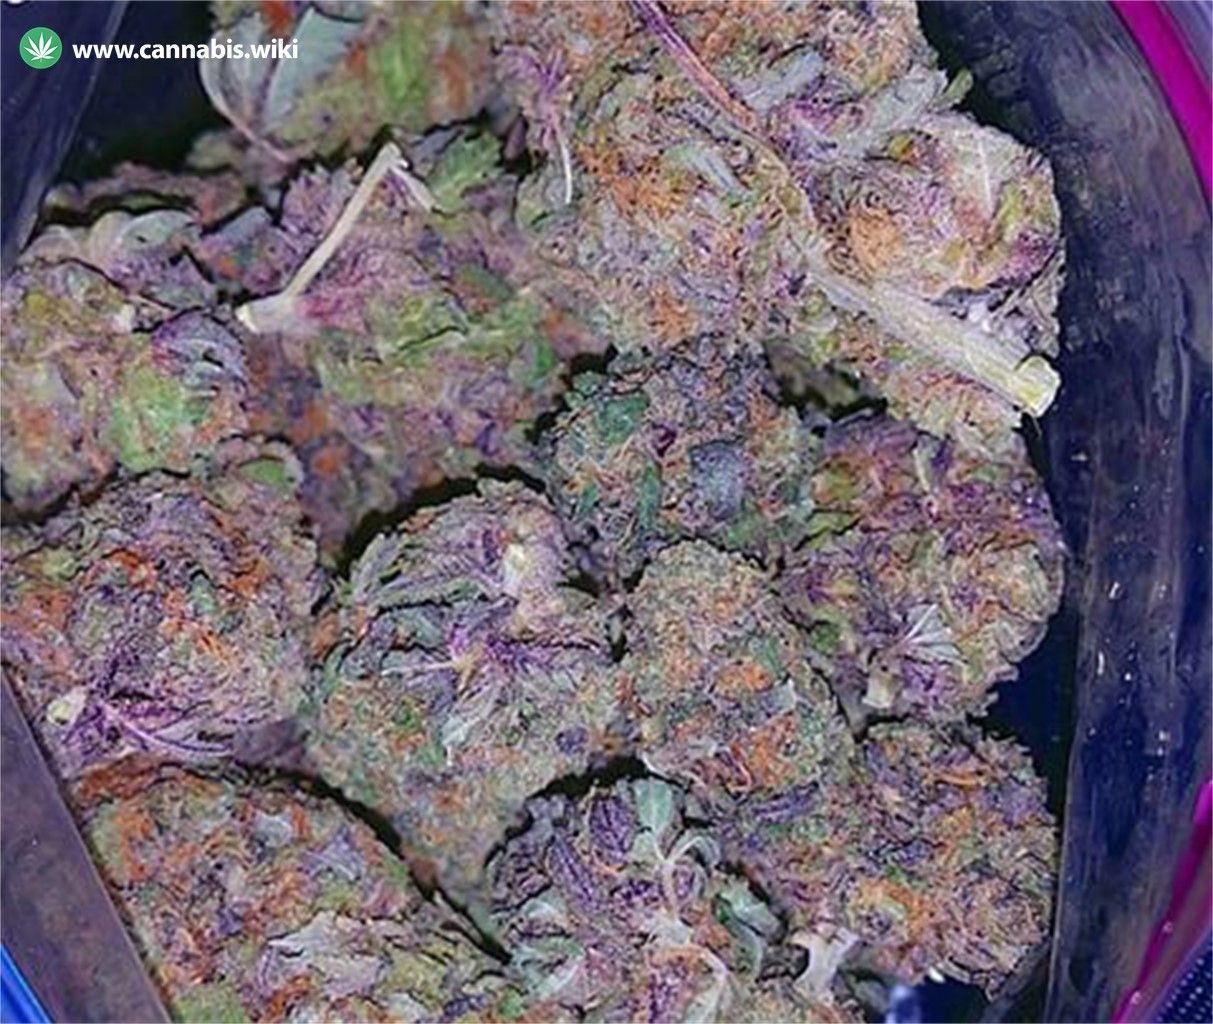 Ice Cream Cake Strain Online in Canada - Free Gift Top Quality Cannabis -  WeedSmart